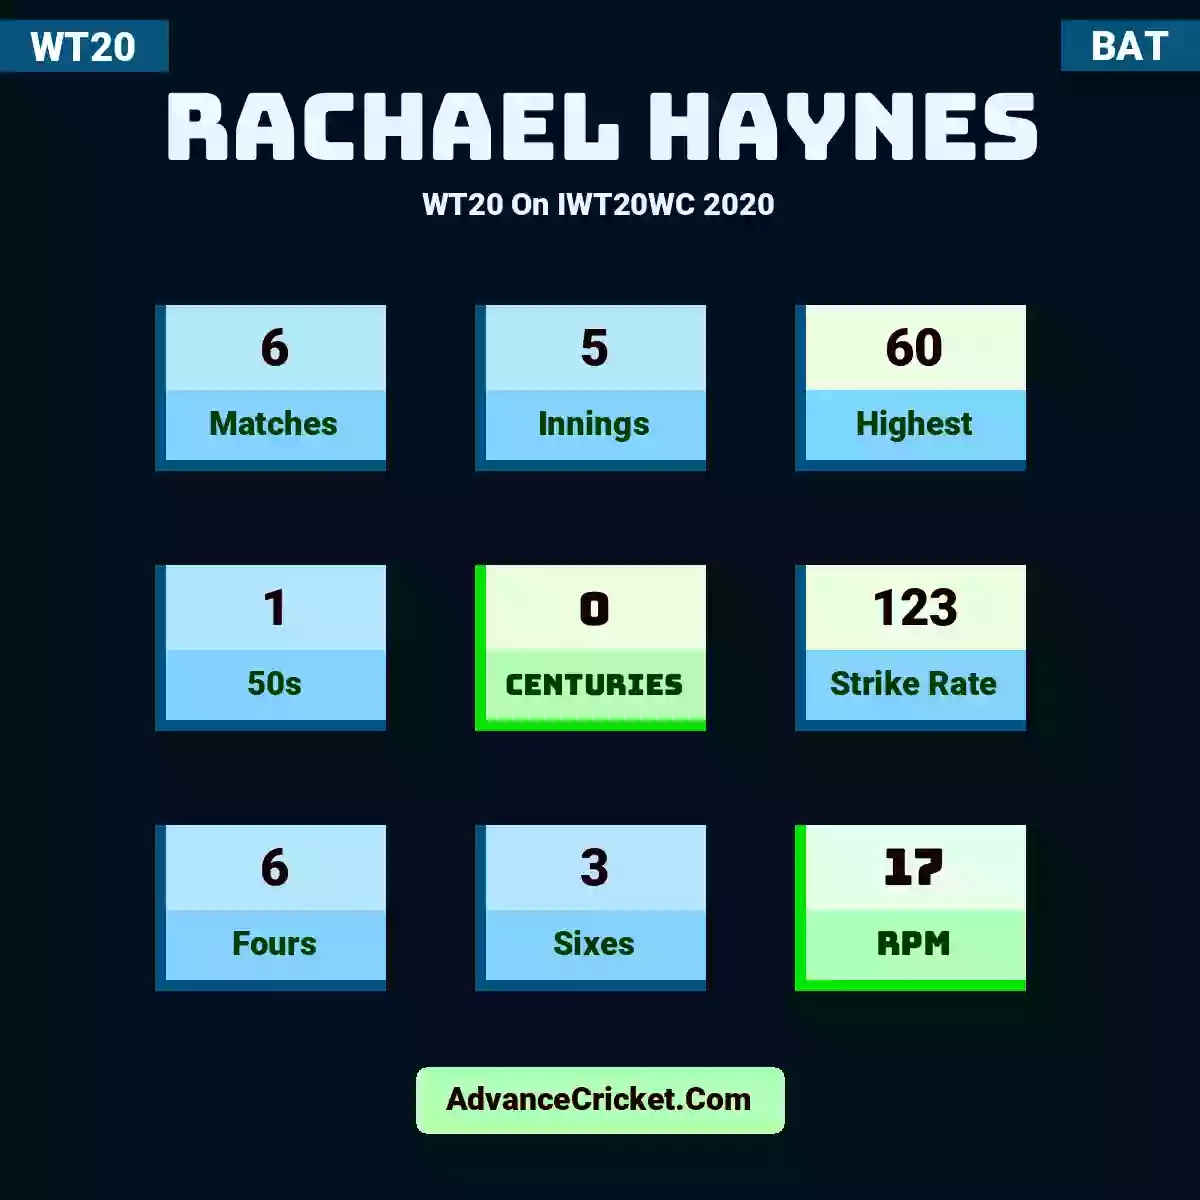 Rachael Haynes WT20  On IWT20WC 2020, Rachael Haynes played 6 matches, scored 60 runs as highest, 1 half-centuries, and 0 centuries, with a strike rate of 123. R.Haynes hit 6 fours and 3 sixes, with an RPM of 17.